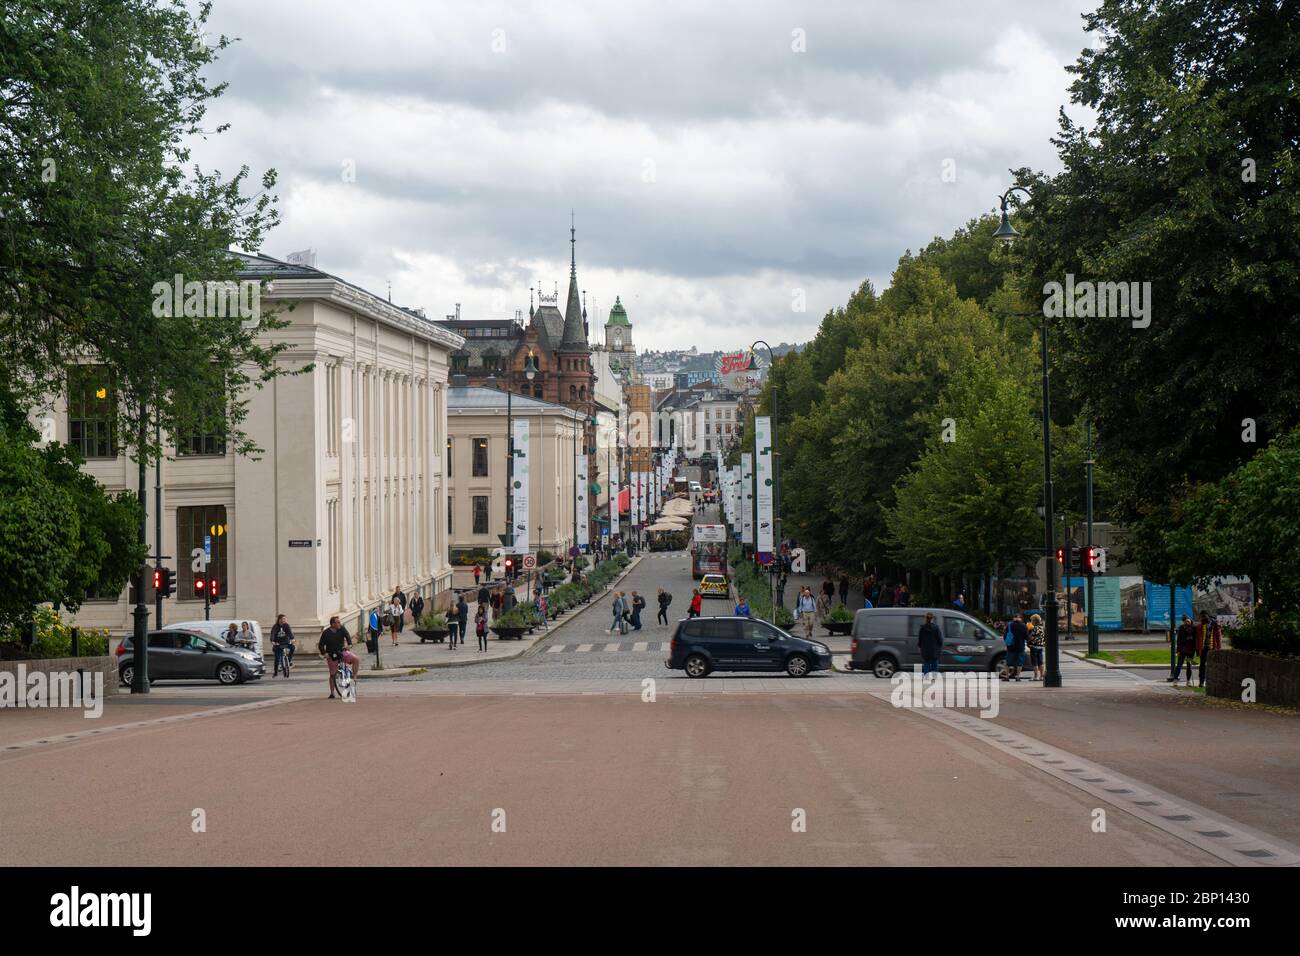 Road to The Royal Palace of Oslo, Norway. August 2019 Stock Photo